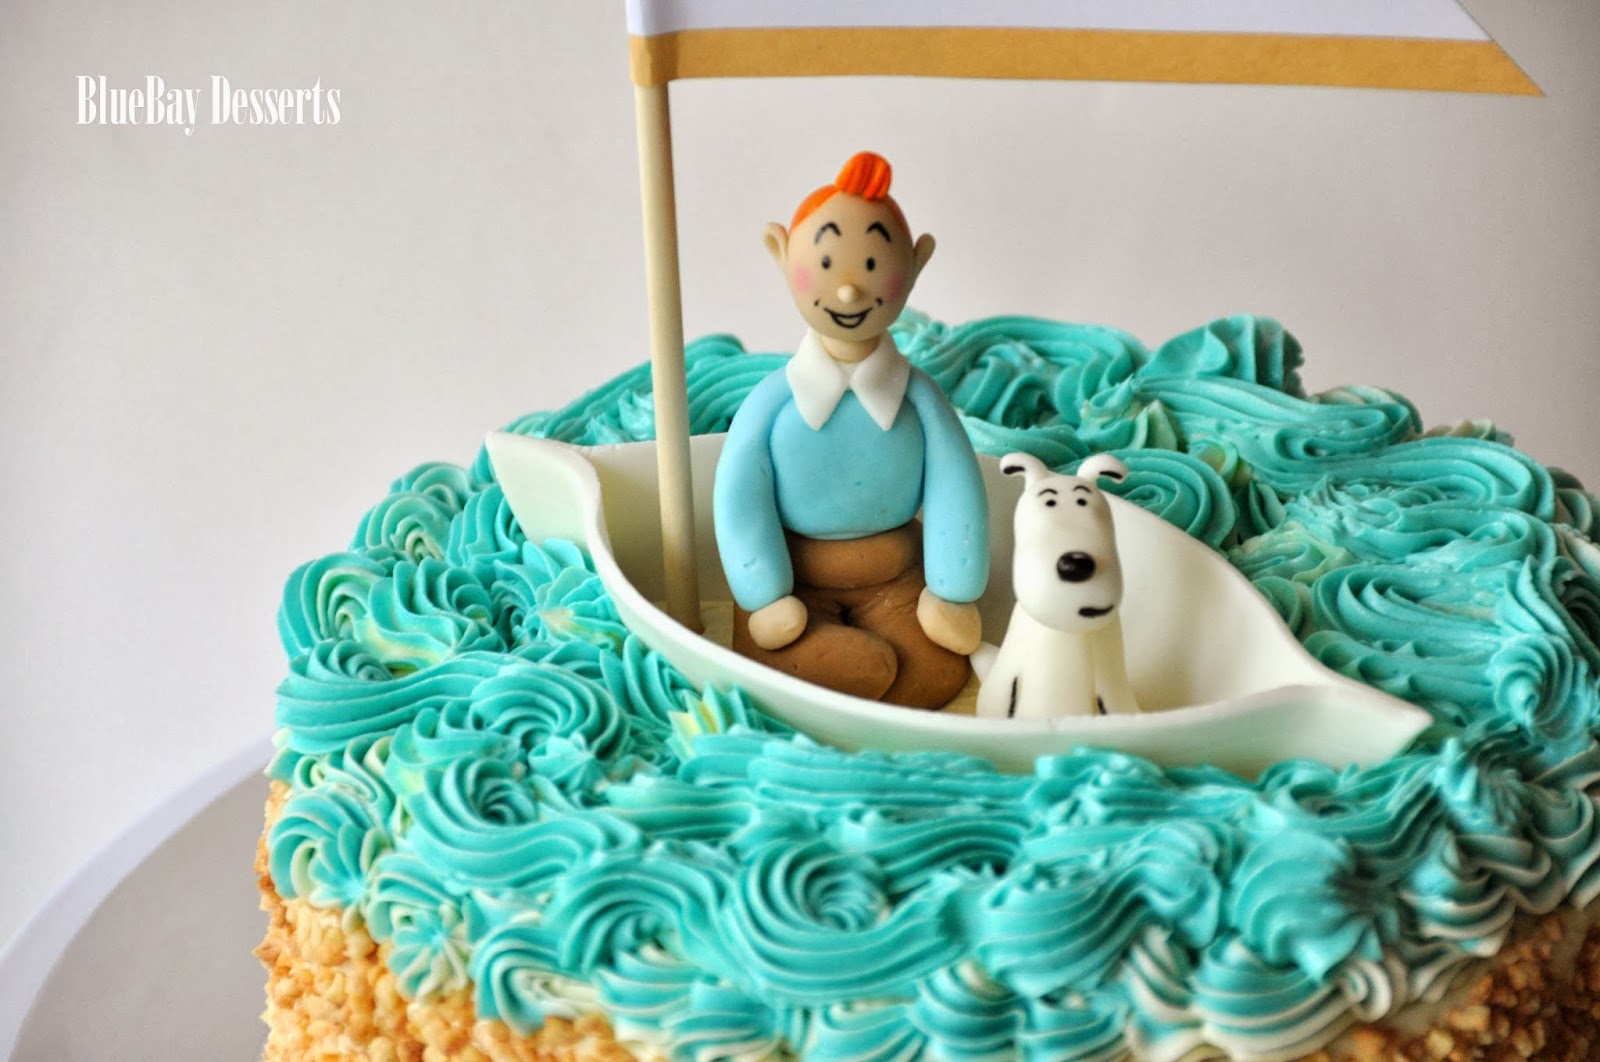 41 Top Images Tintin Cake Decorations - Tintin Cake Side View By Darklizard14 On Deviantart